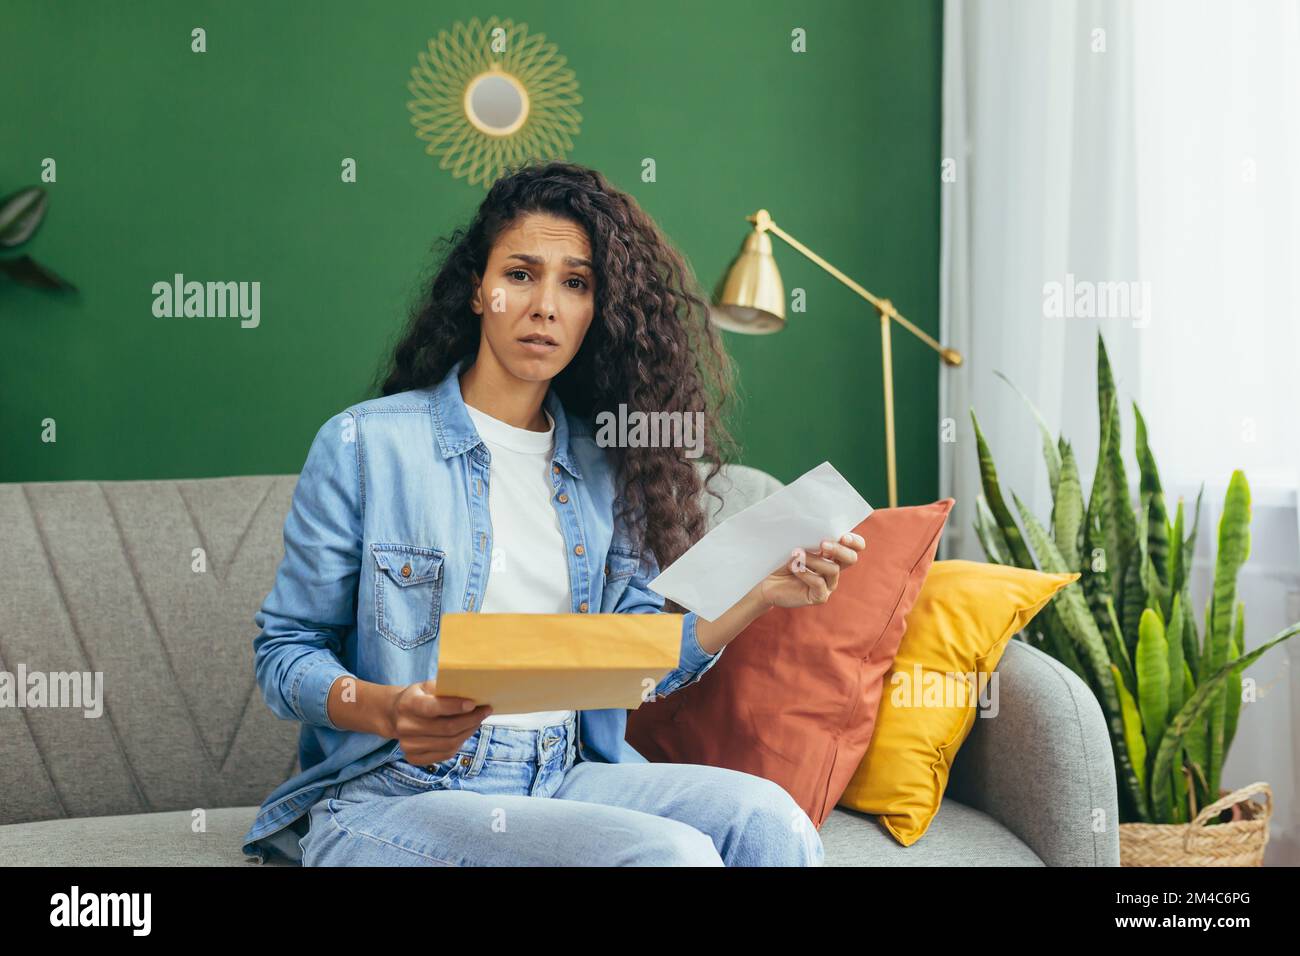 Portrait of disappointed and sad woman, hispanic woman with received envelope looking frowning at camera, sitting on sofa in living room. Stock Photo